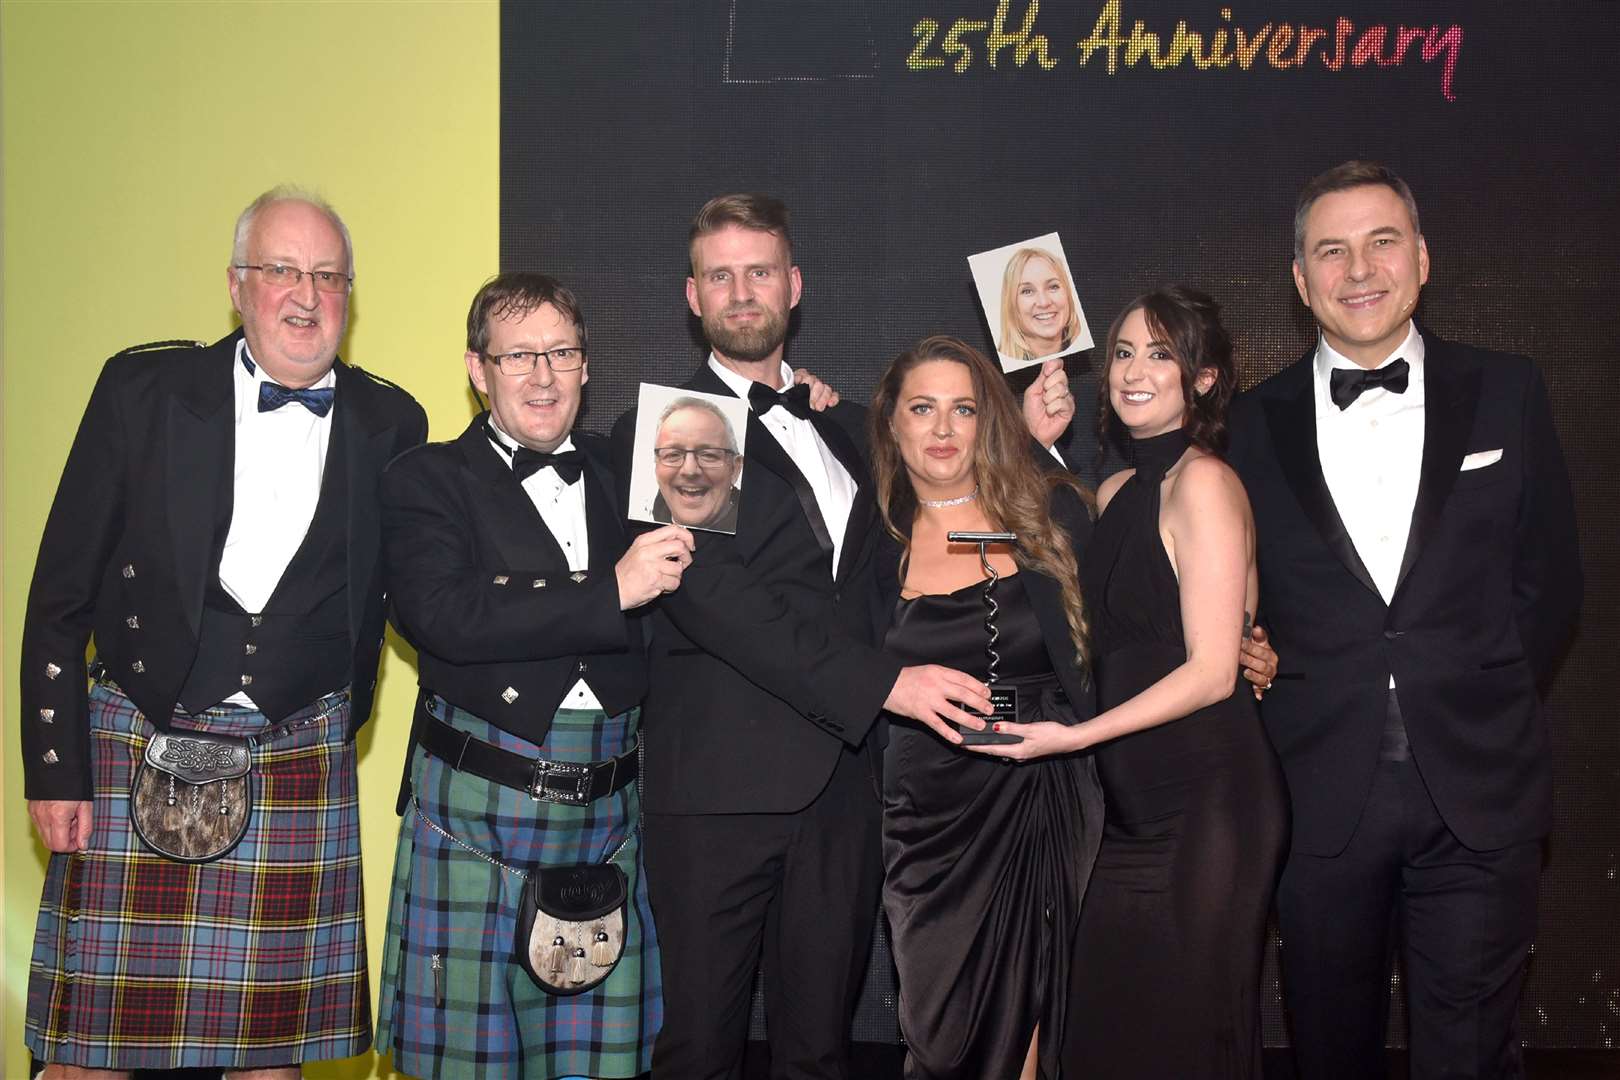 MacGregor's Bar proprietors Bruce MacGregor and Jo de Syvla made a virtual appearance on stage to collect the independent pub award.